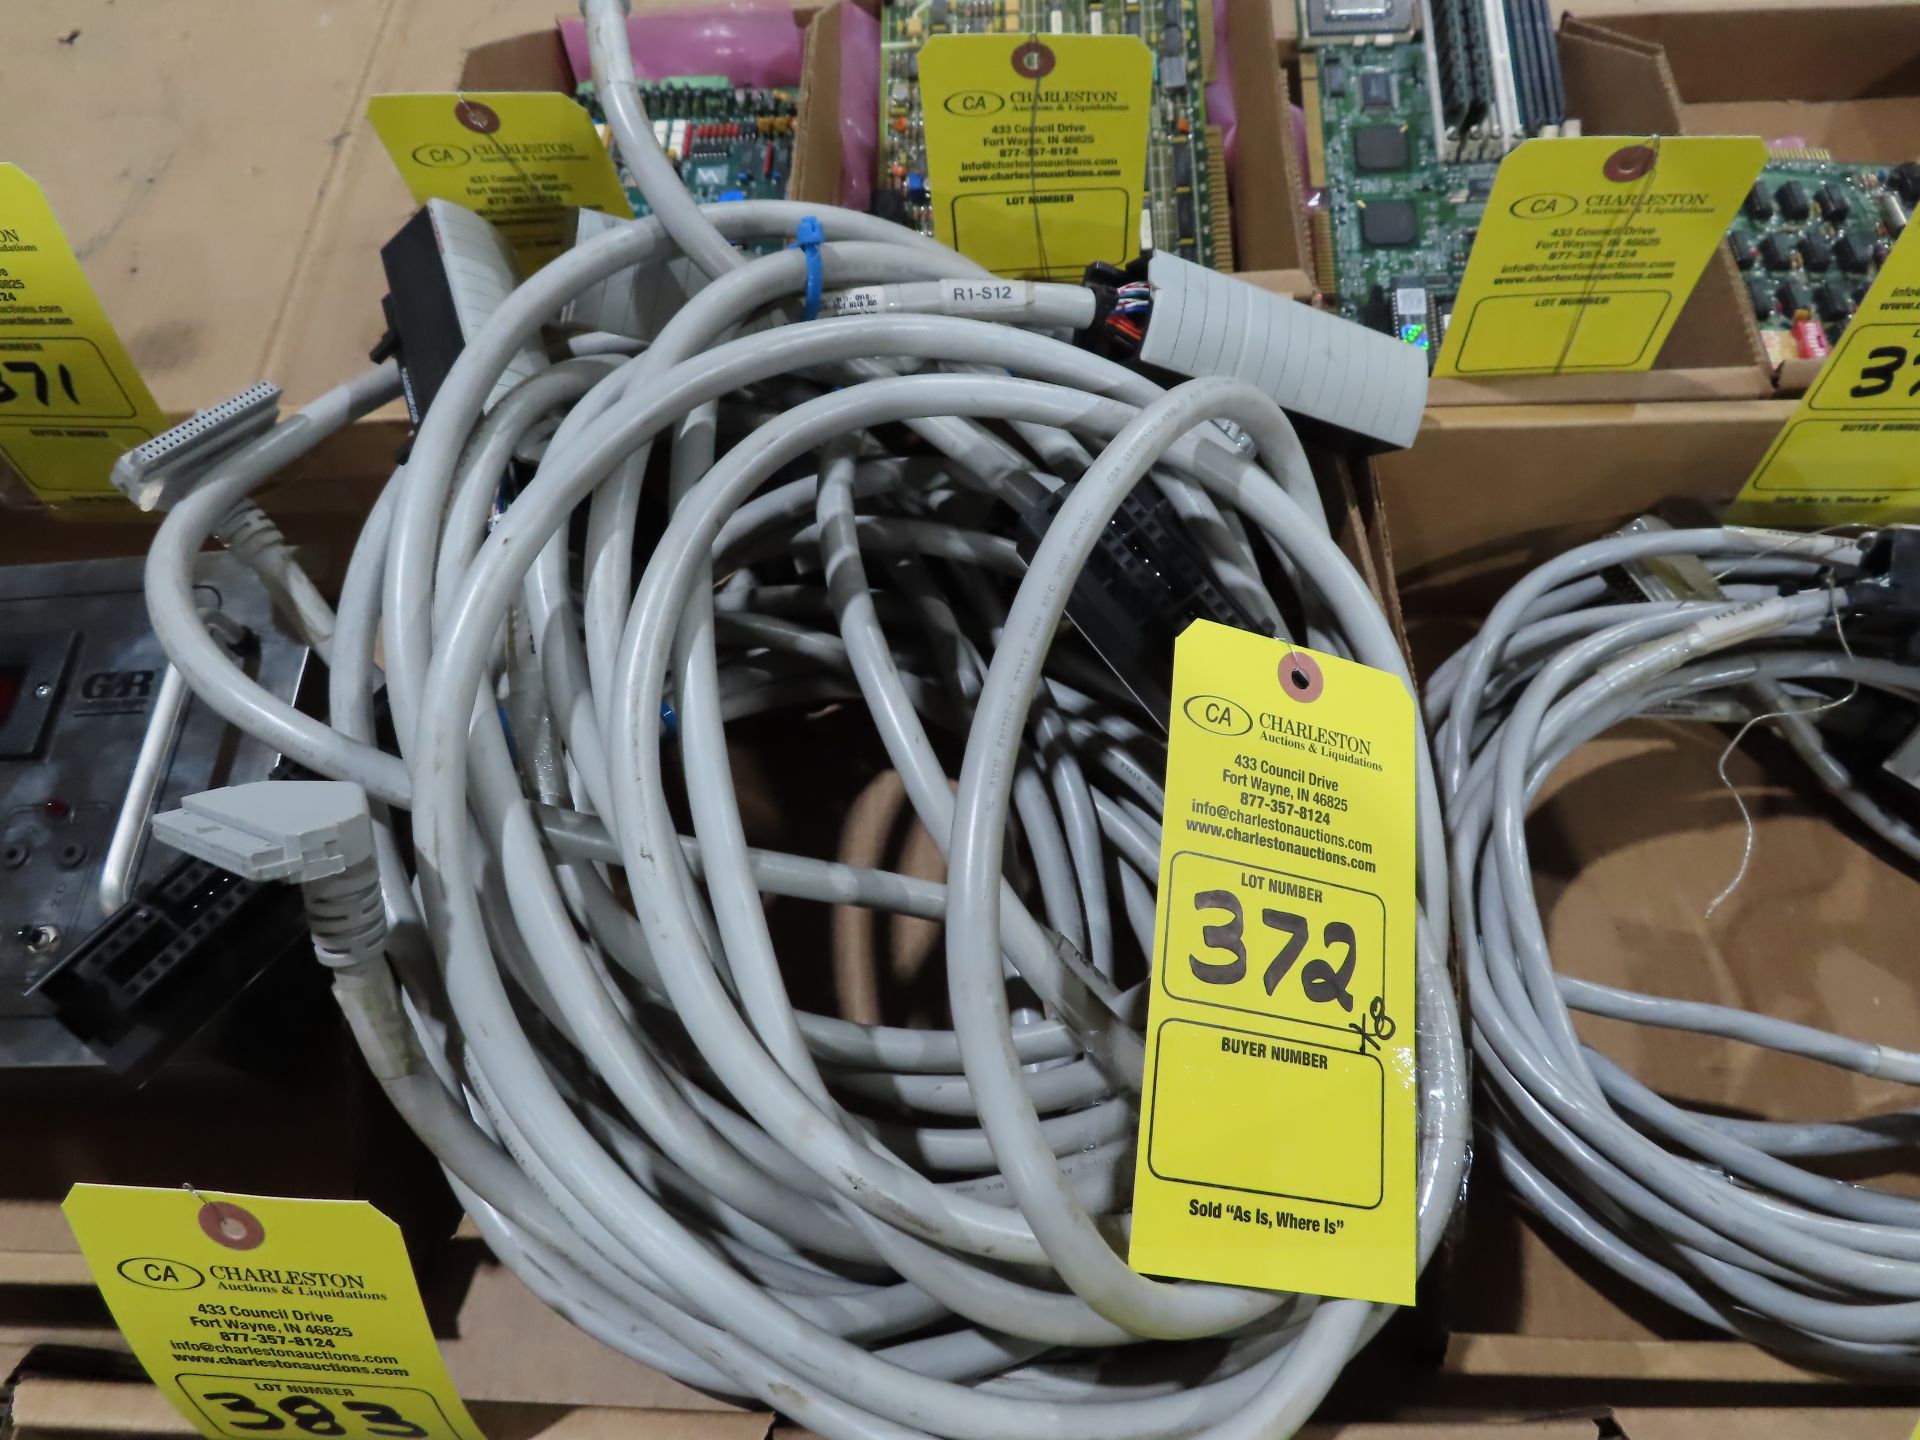 Qty 8 Allen Bradley 1492-Cable025Y, as always, with Brolyn LLC auctions, all lots can be picked up